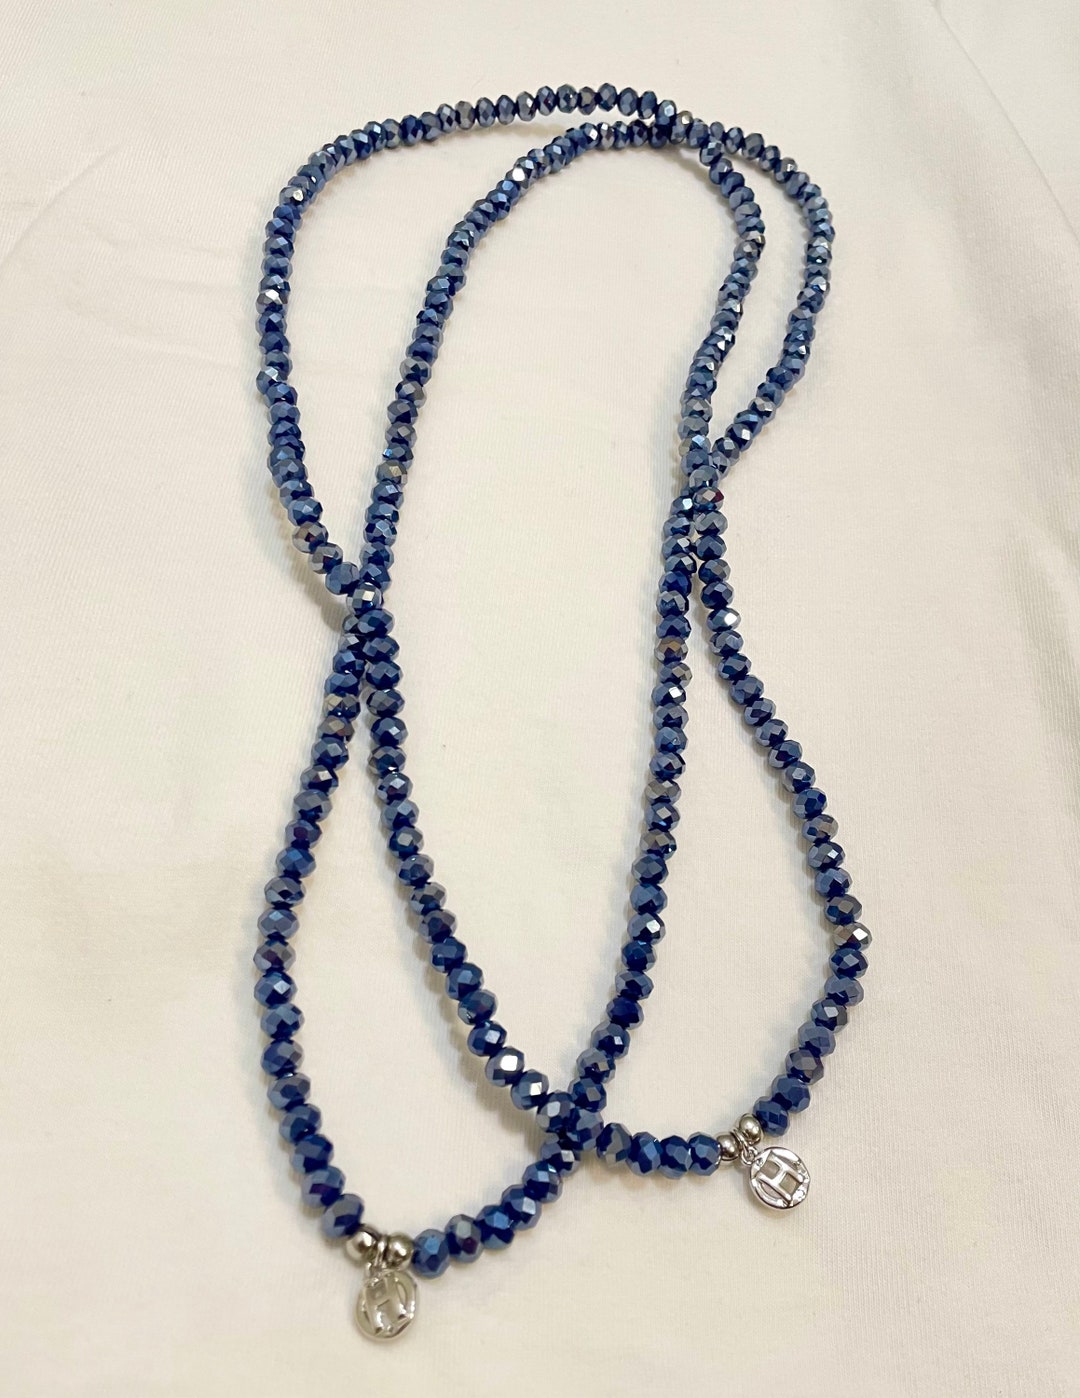 K.humility Chain Midnight Blue Large 6x4 Bead Size - Etsy